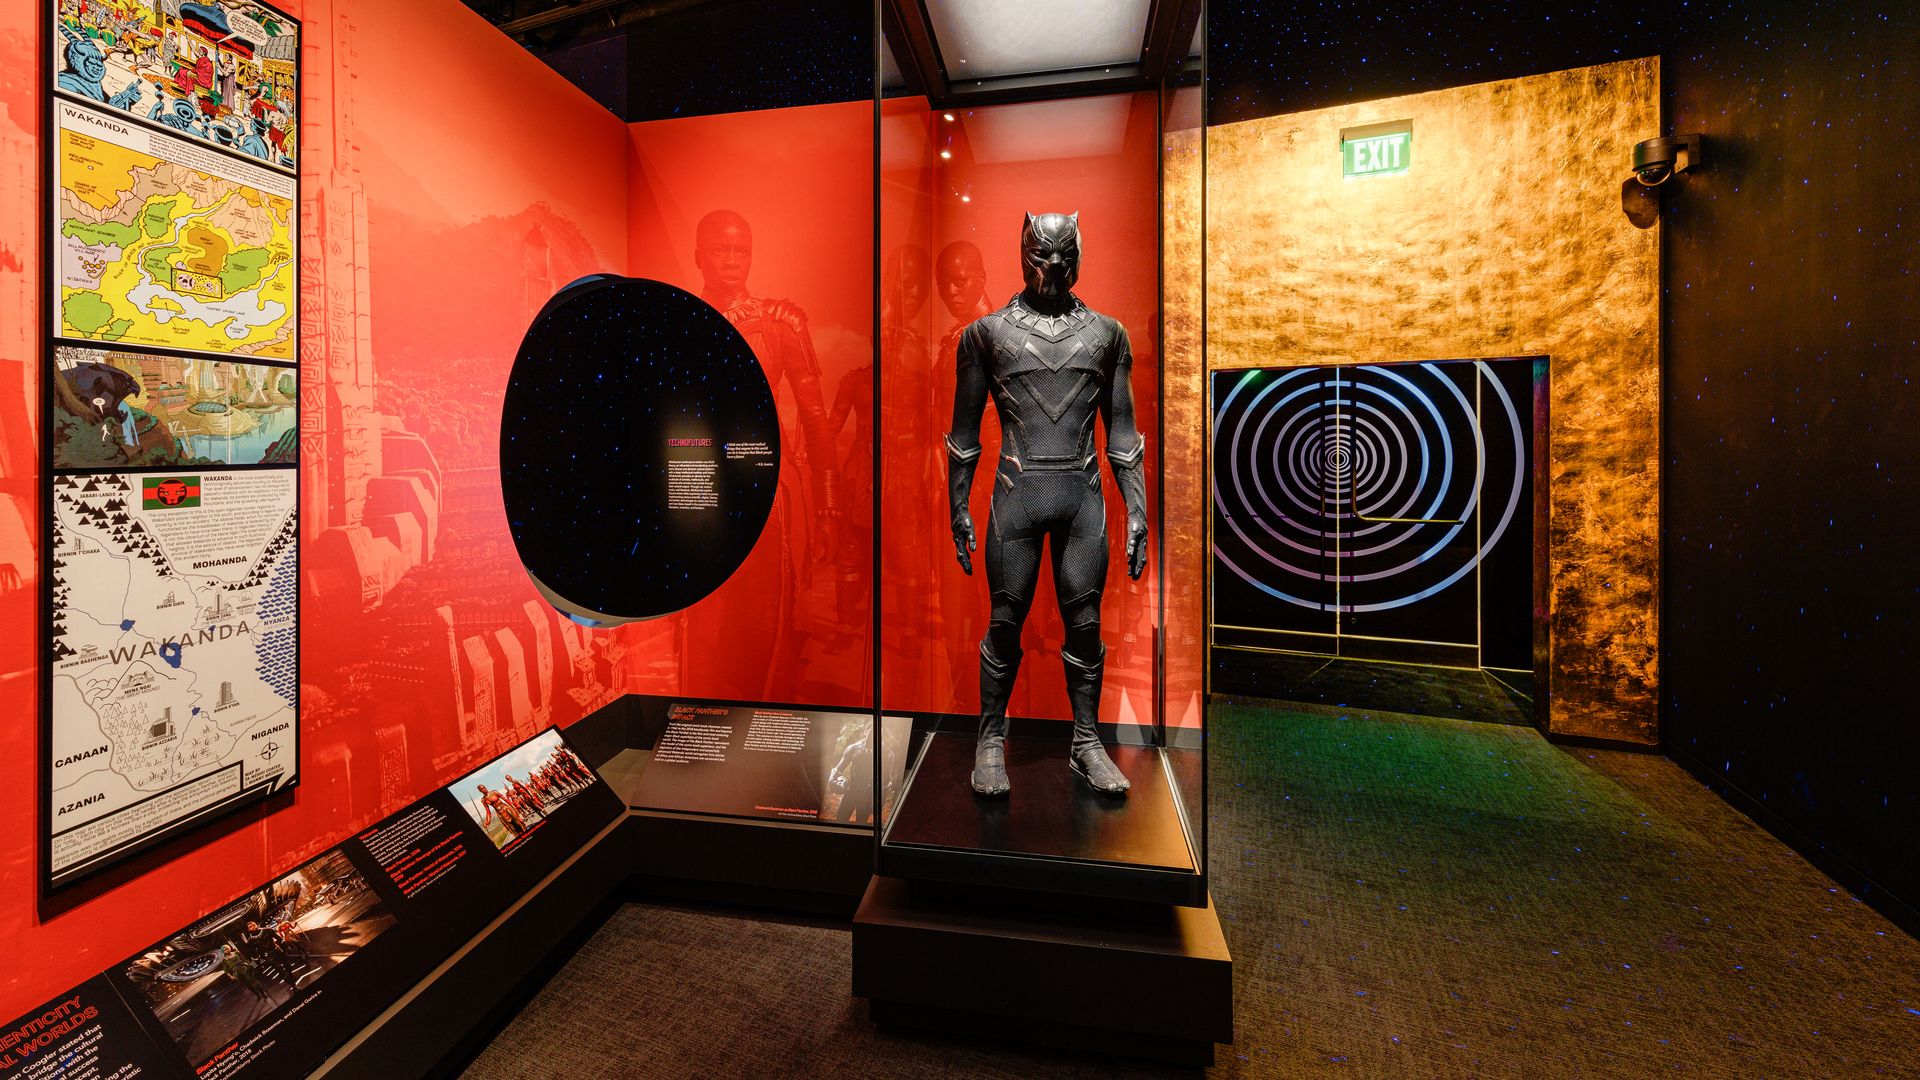 A museum exhibit with a mostly red and orange background. In the foreground is a superhero suit wore by Black Panther in a glass case.